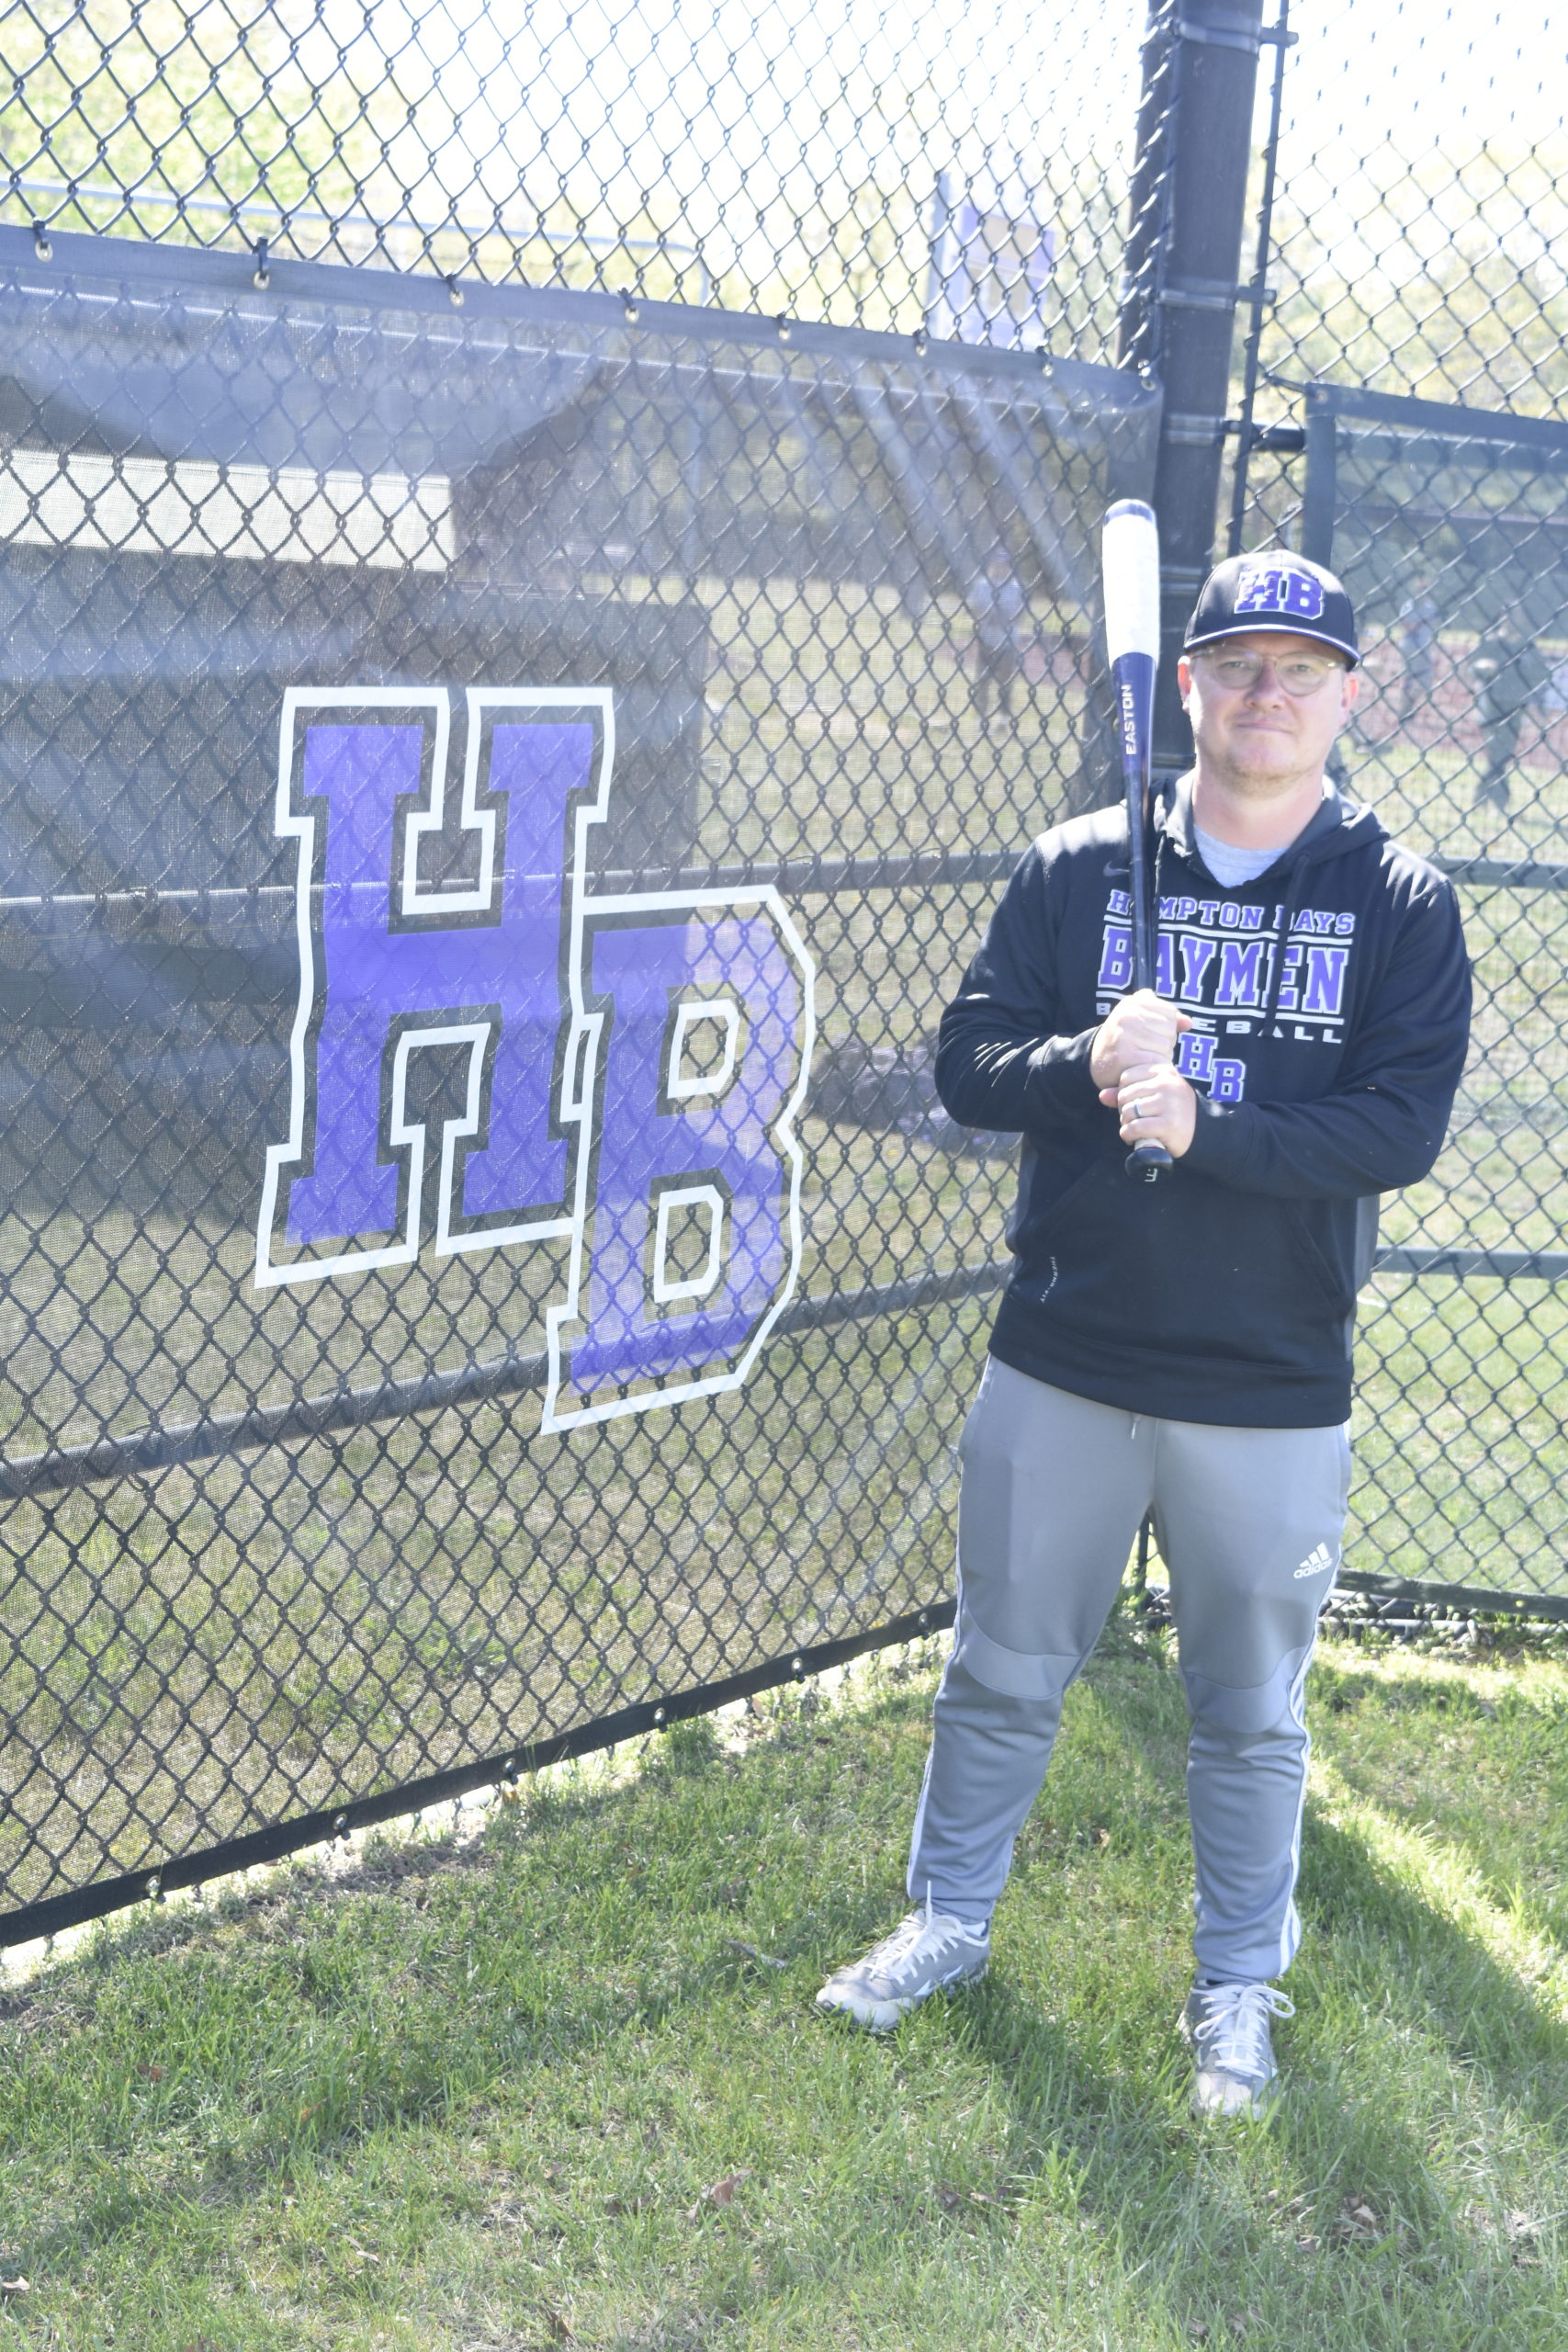 John Foster is the new head coach of Hampton Bays varsity baseball, the same team he won a county title with back in 2001 as a player under his mentor and now retired coach Pete Meehan.